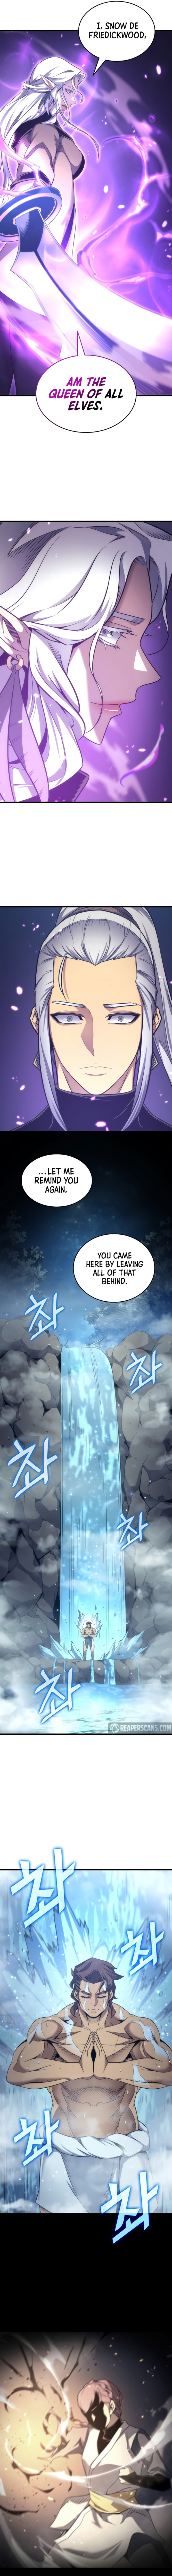 The Great Mage Returns After 4000 Years - Chapter 164 Page 7